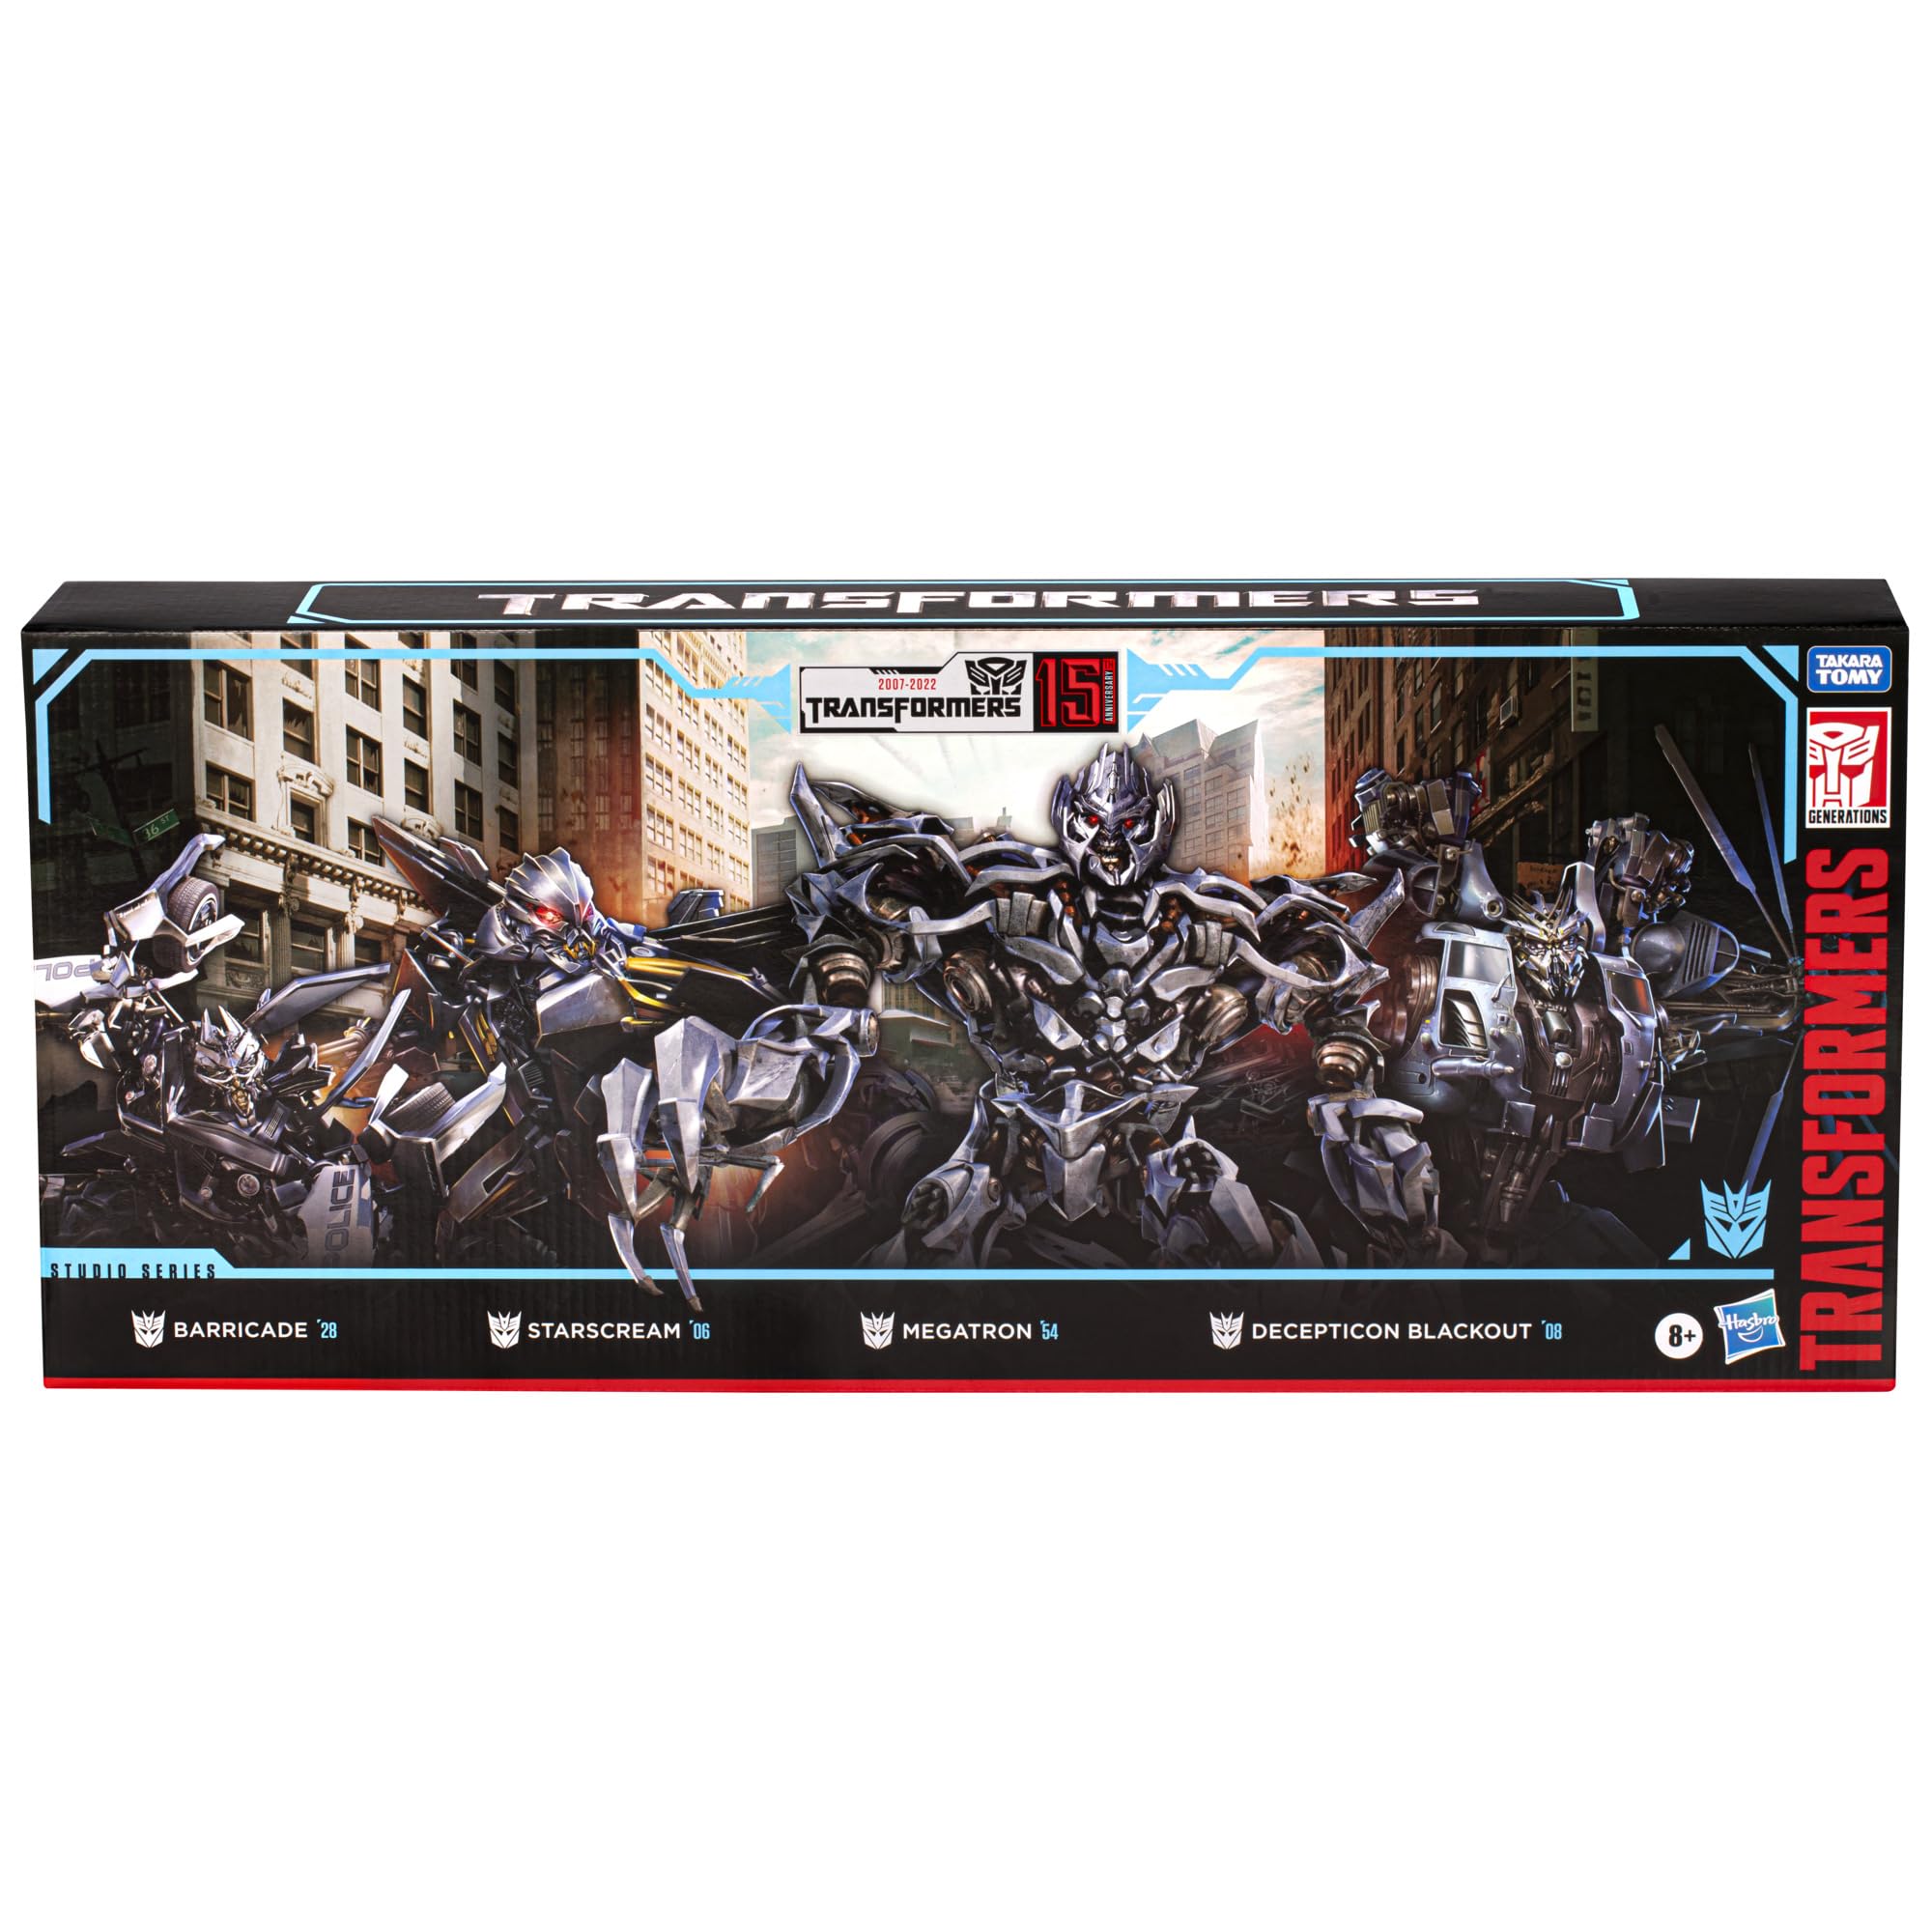 Transformers Toys Studio Series Movie 1 15th Anniversary Decepticon Multipack, with 4 Action Figures for Boys and Girls Ages 8 and Up (Amazon Exclusive)